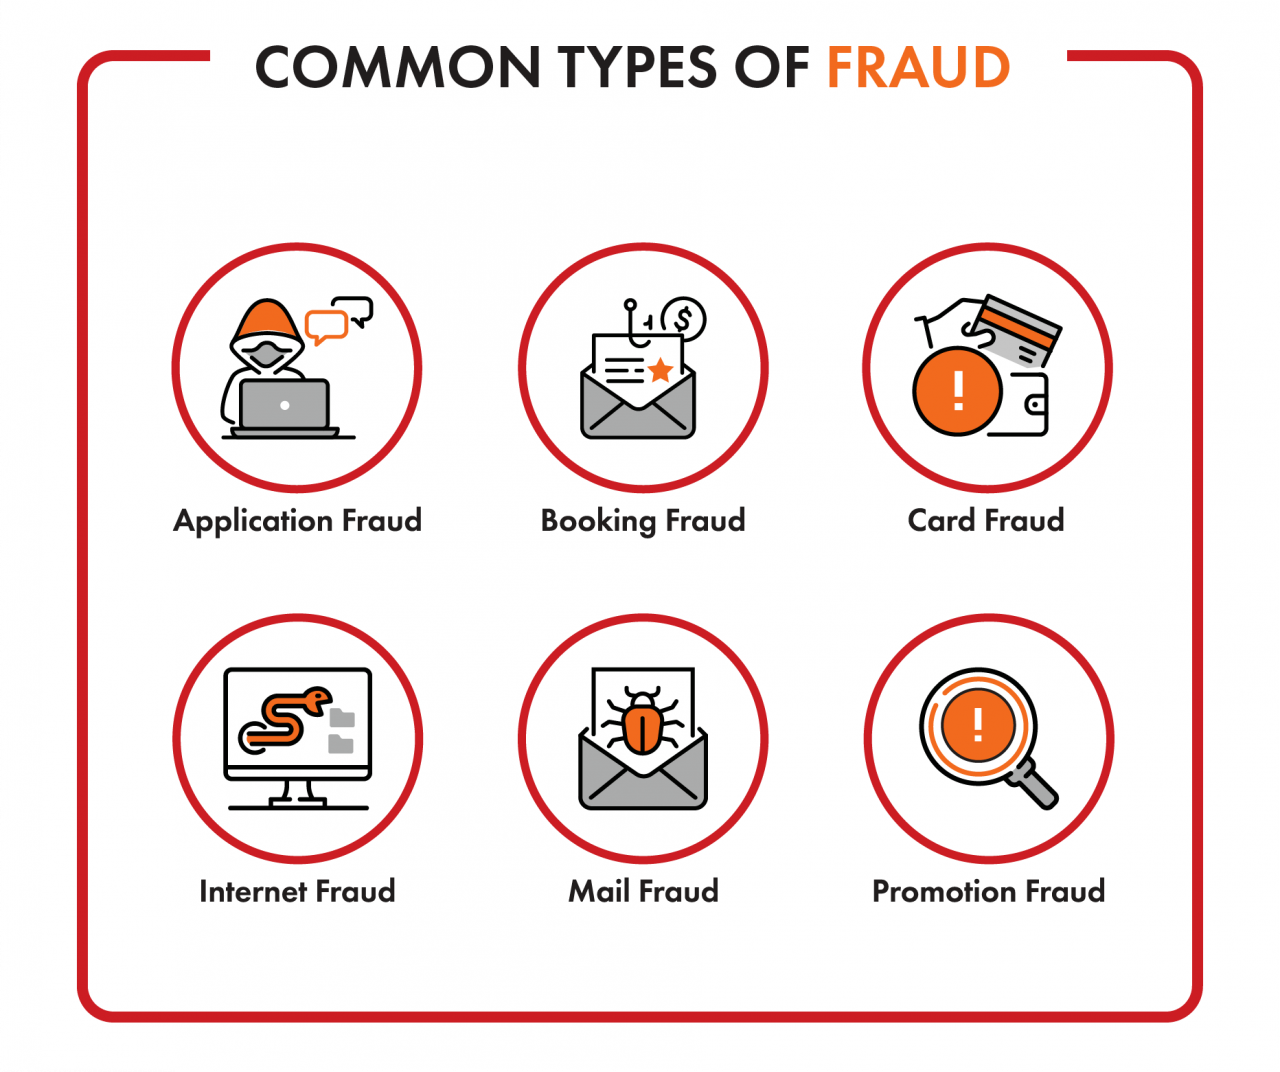 Common types of fraud